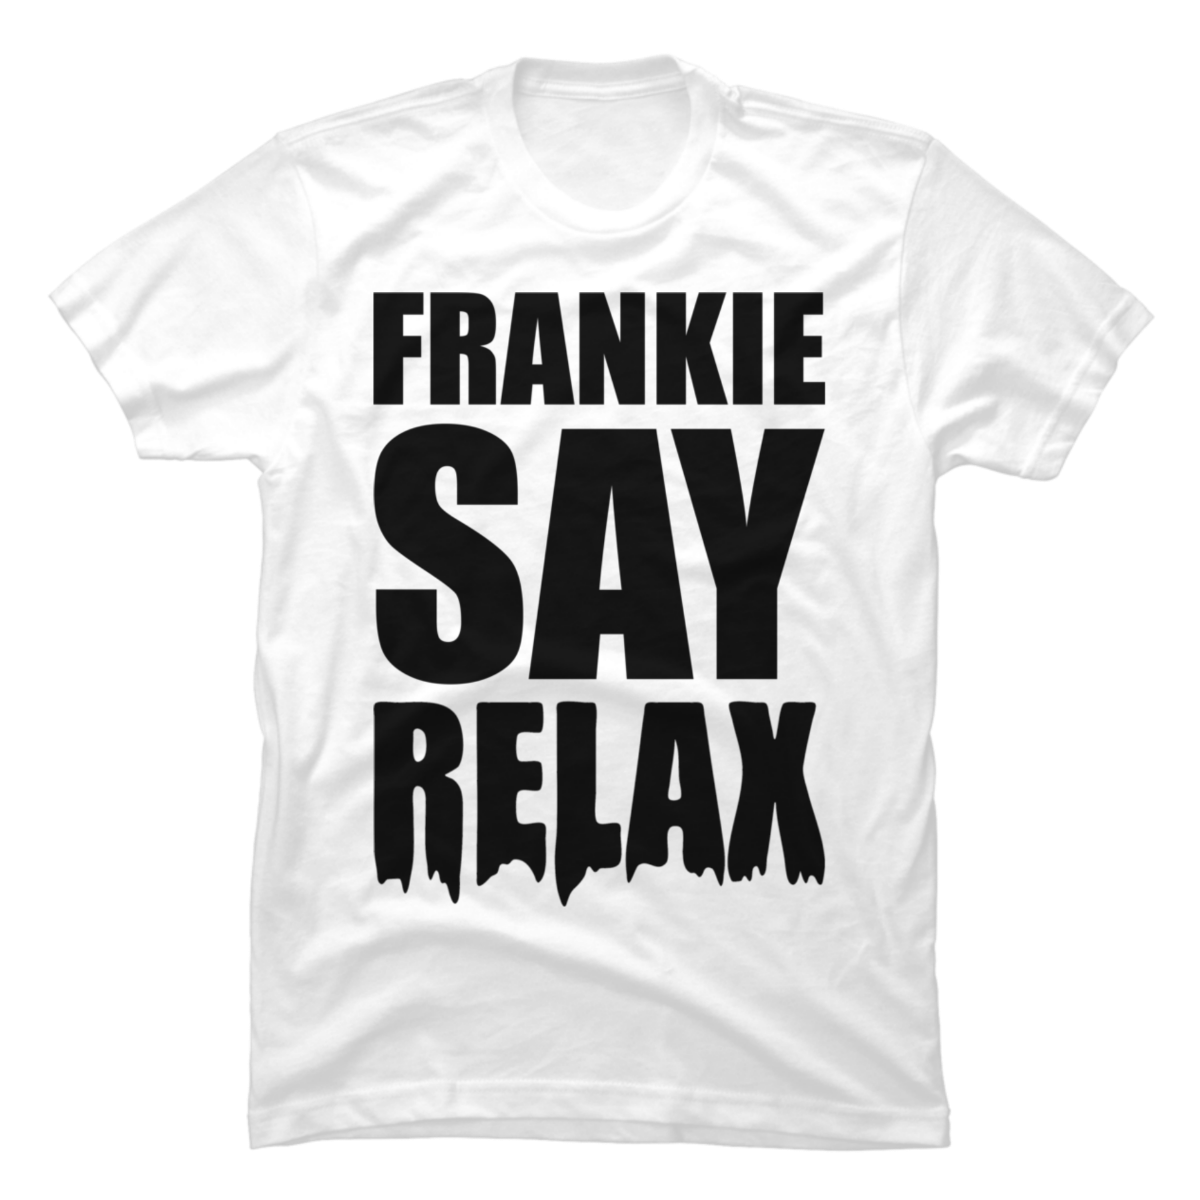 frankie say relax t shirt